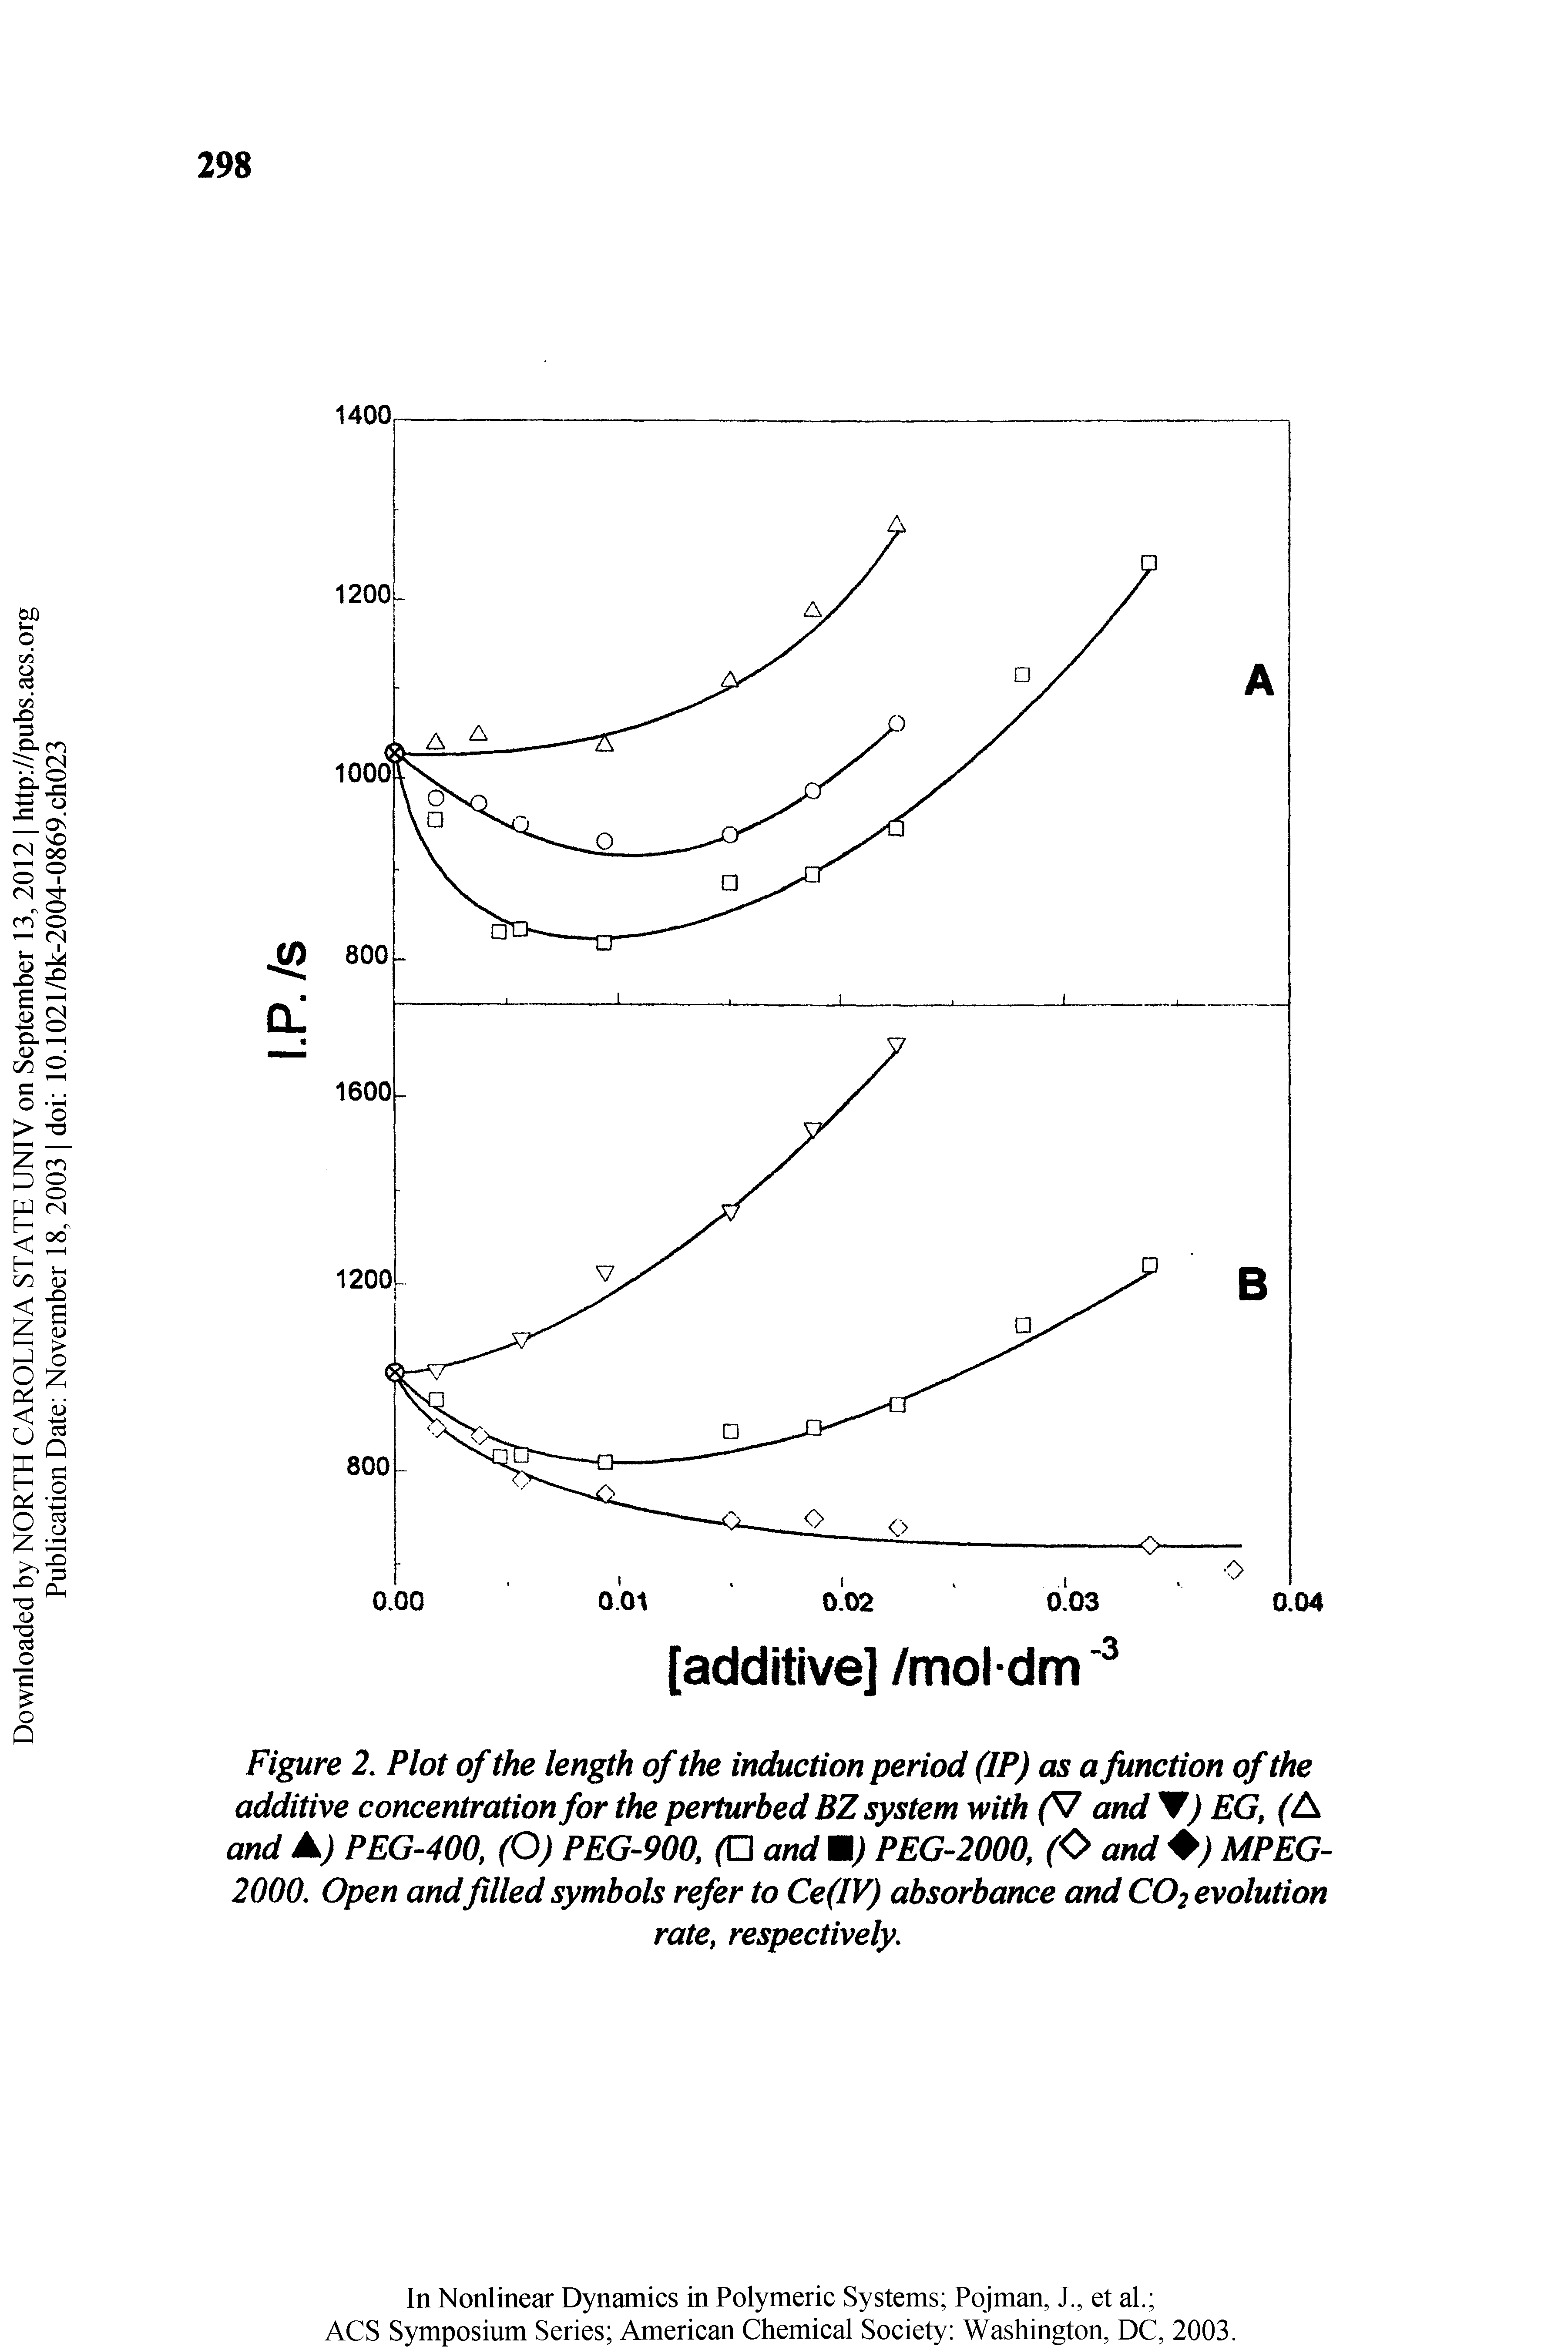 Figure 2. Plot of the length of the induction period (IP) as a function of the additive concentration for the perturbed BZ system with (V and W) EG, (A and A) PEG-400, (O) PEG-900, and M) PEG-2000, (O and MPEG-2000, Open andfilled symbols refer to Ce(IV) absorbance and CO2 evolution...